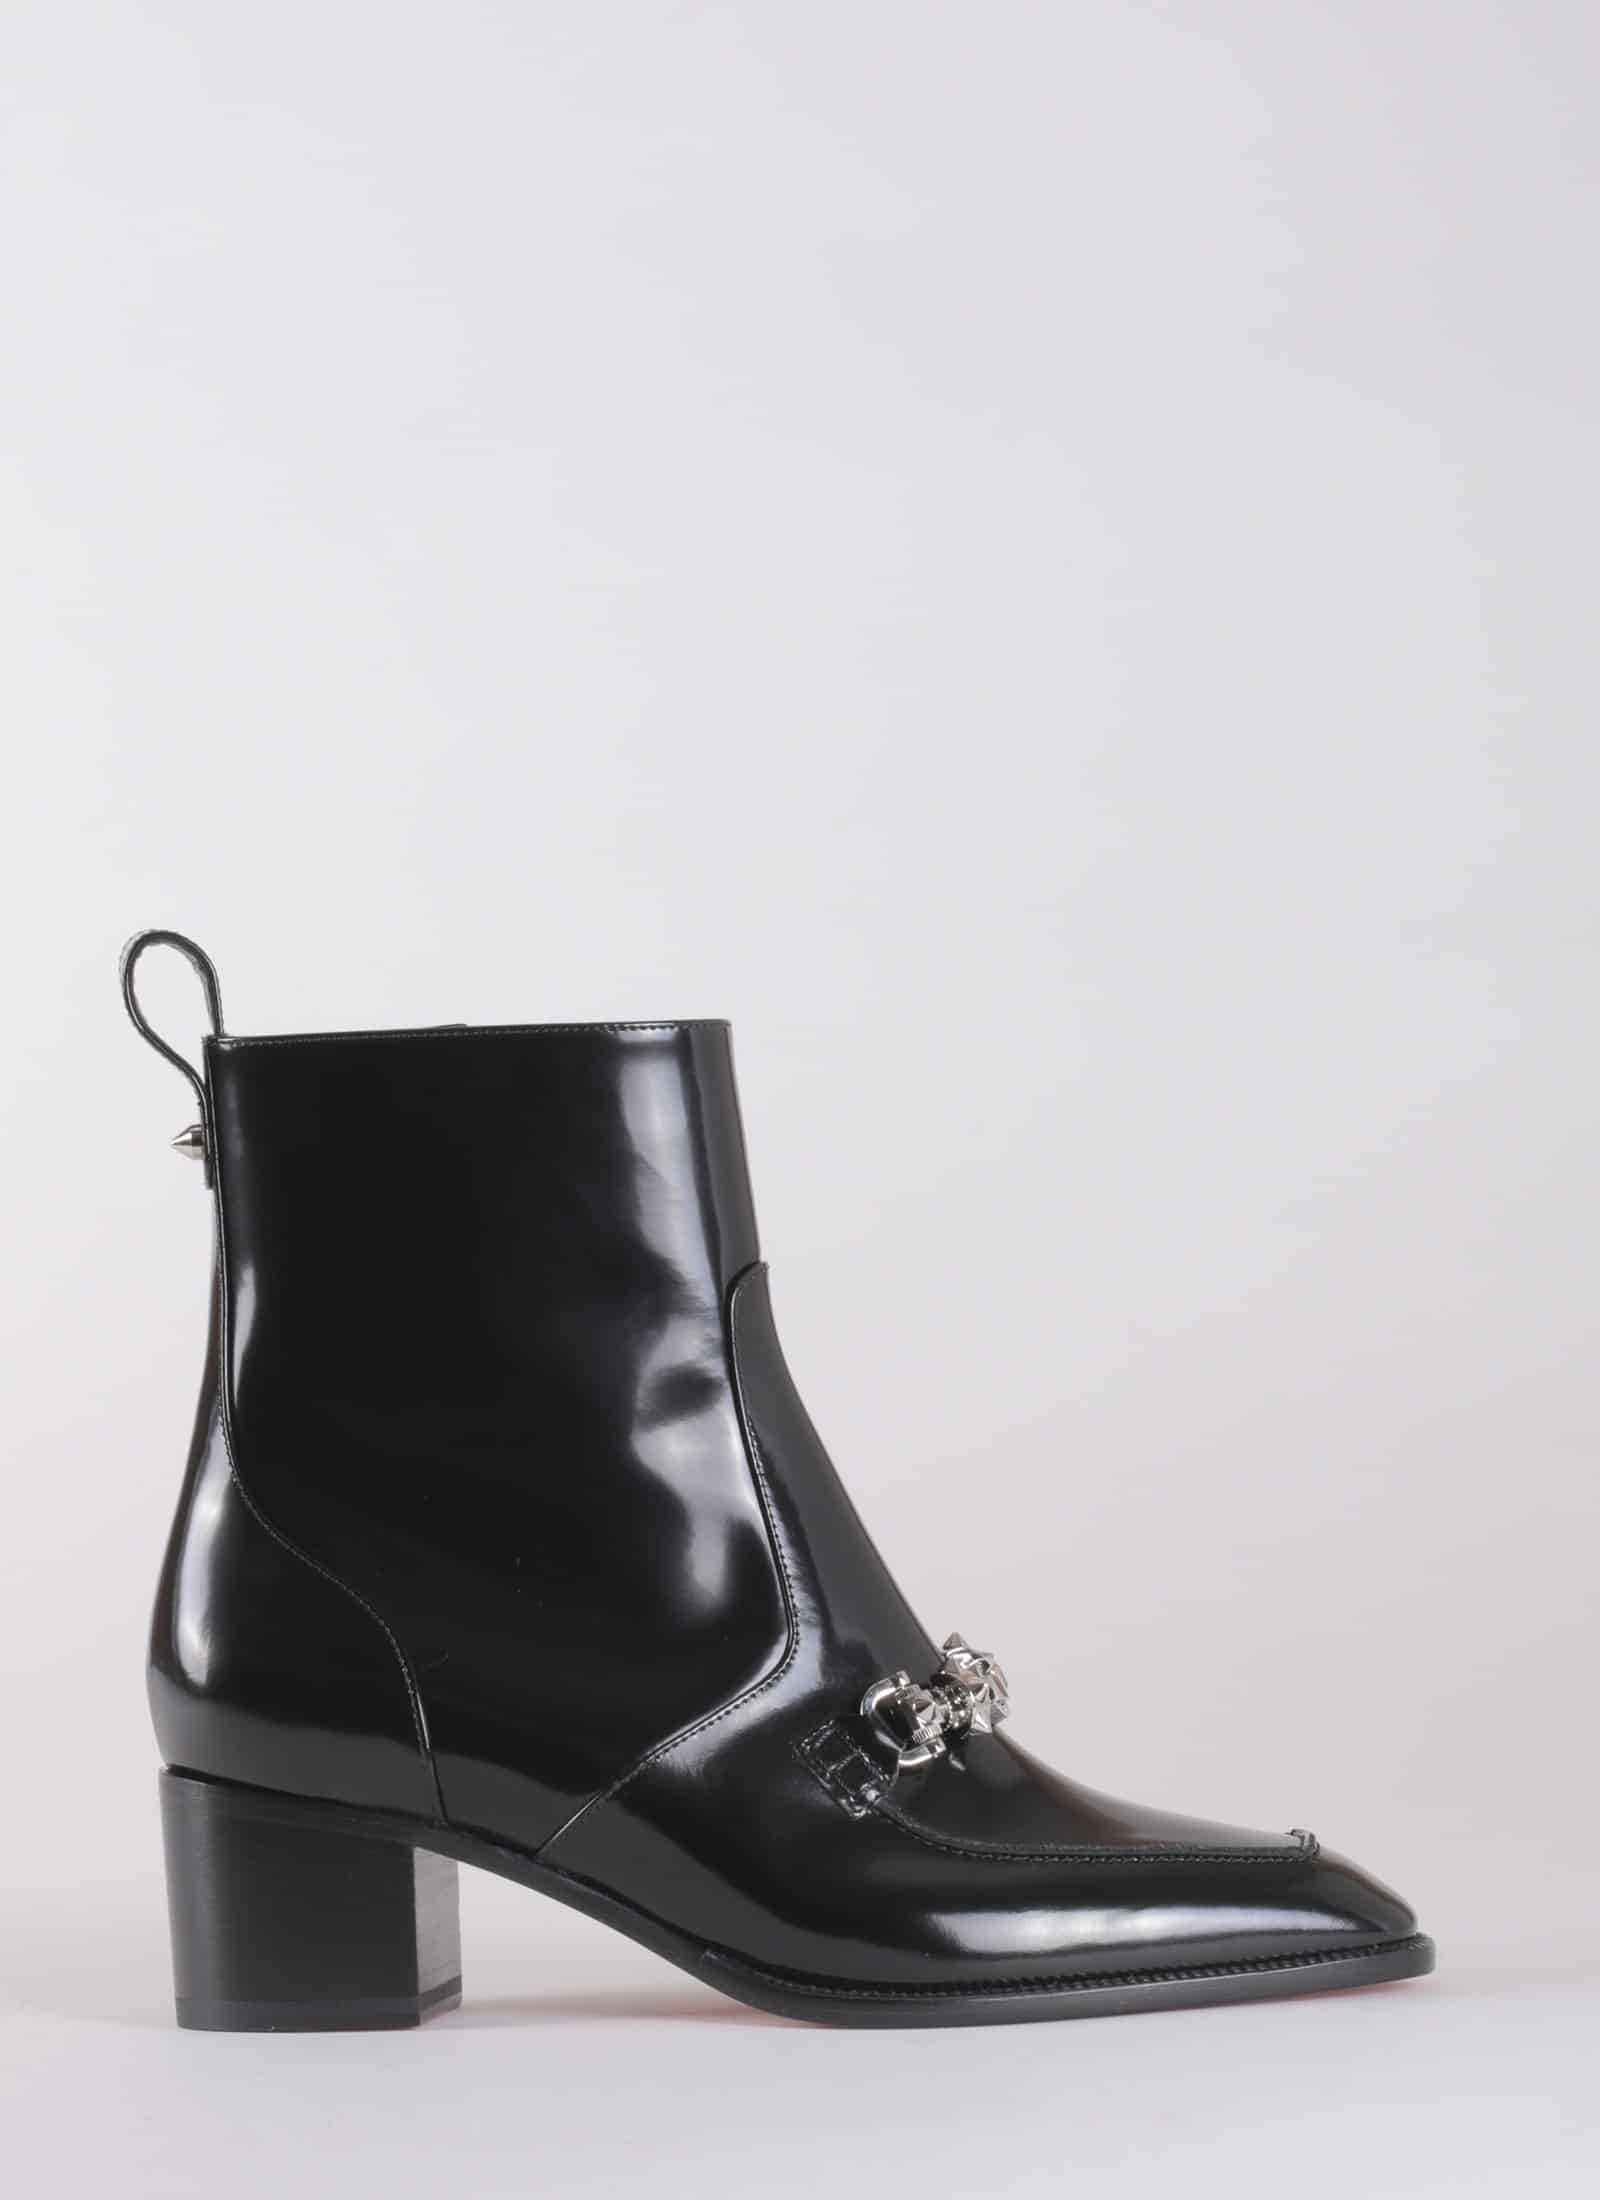 LEATHER BOOTS - CHRISTIAN LOUBOUTIN